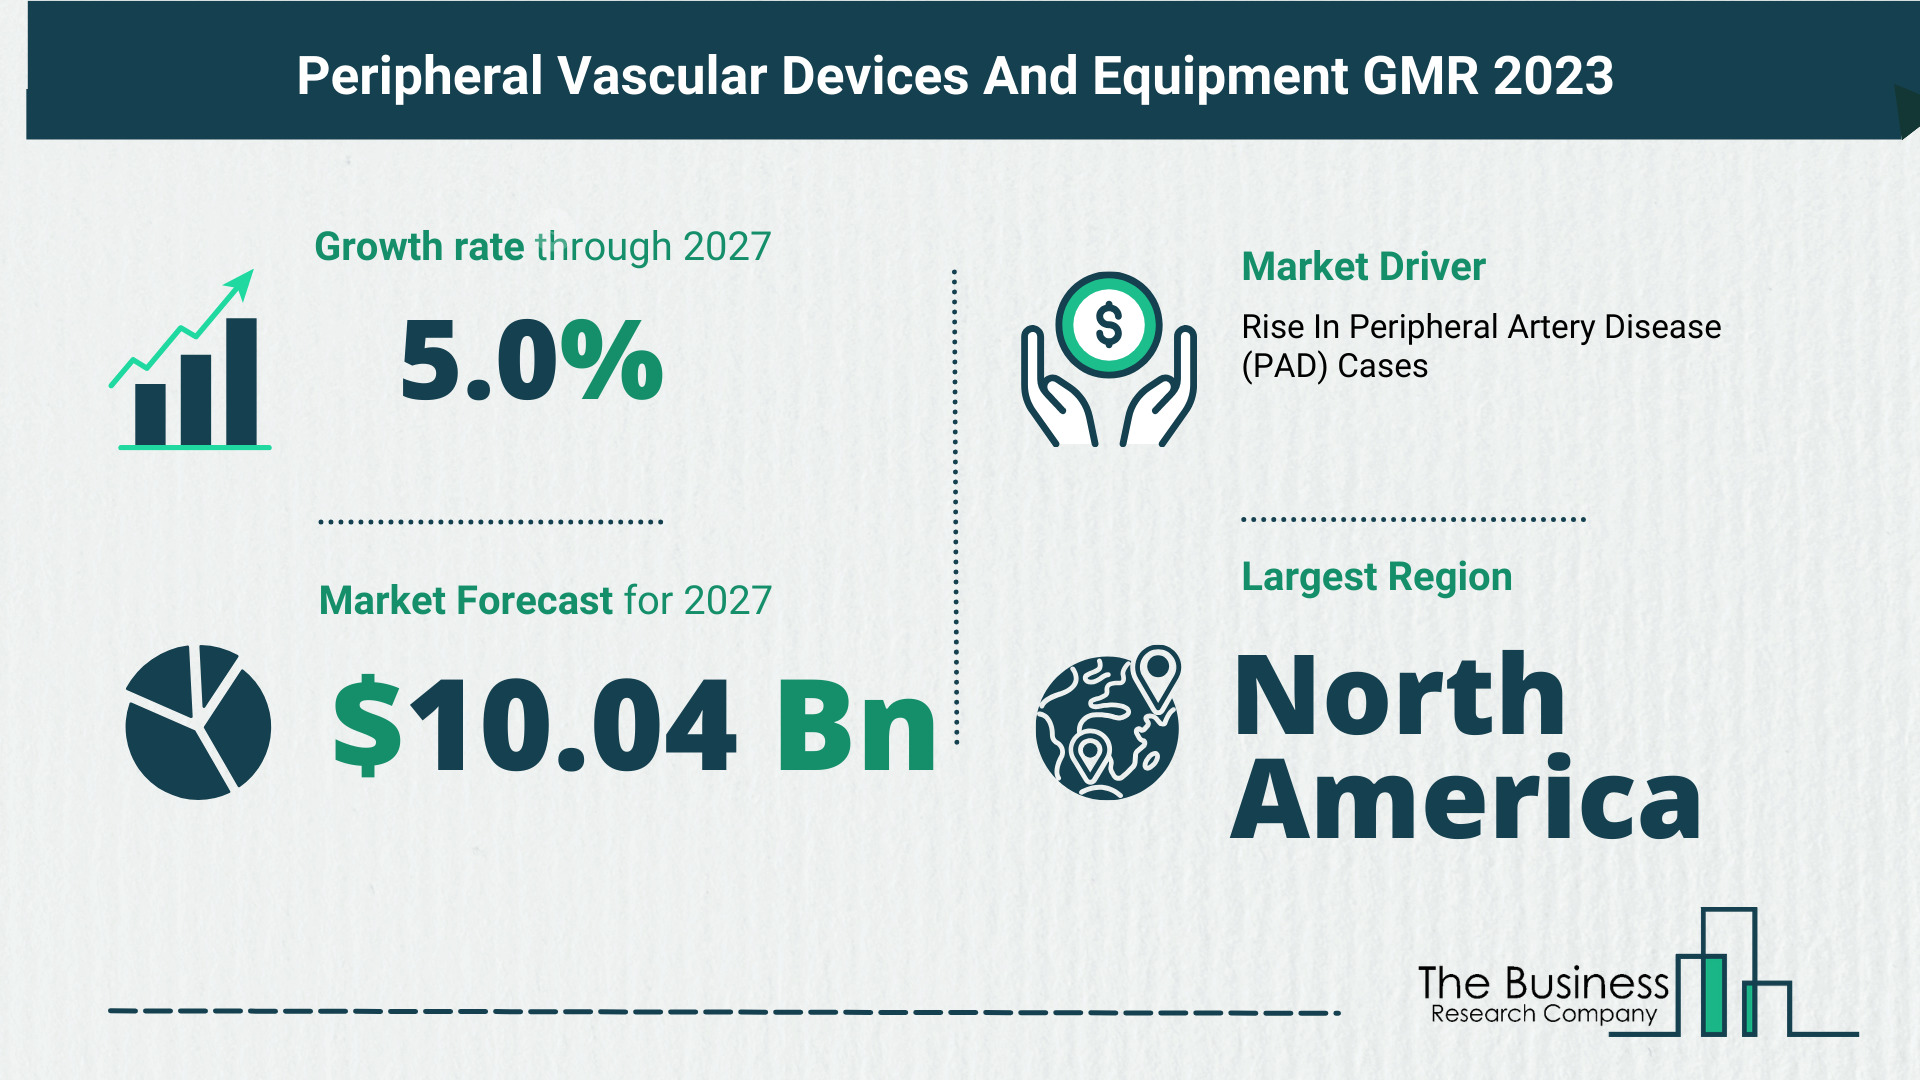 Key Takeaways From The Global Peripheral Vascular Devices And Equipment Market Forecast 2023